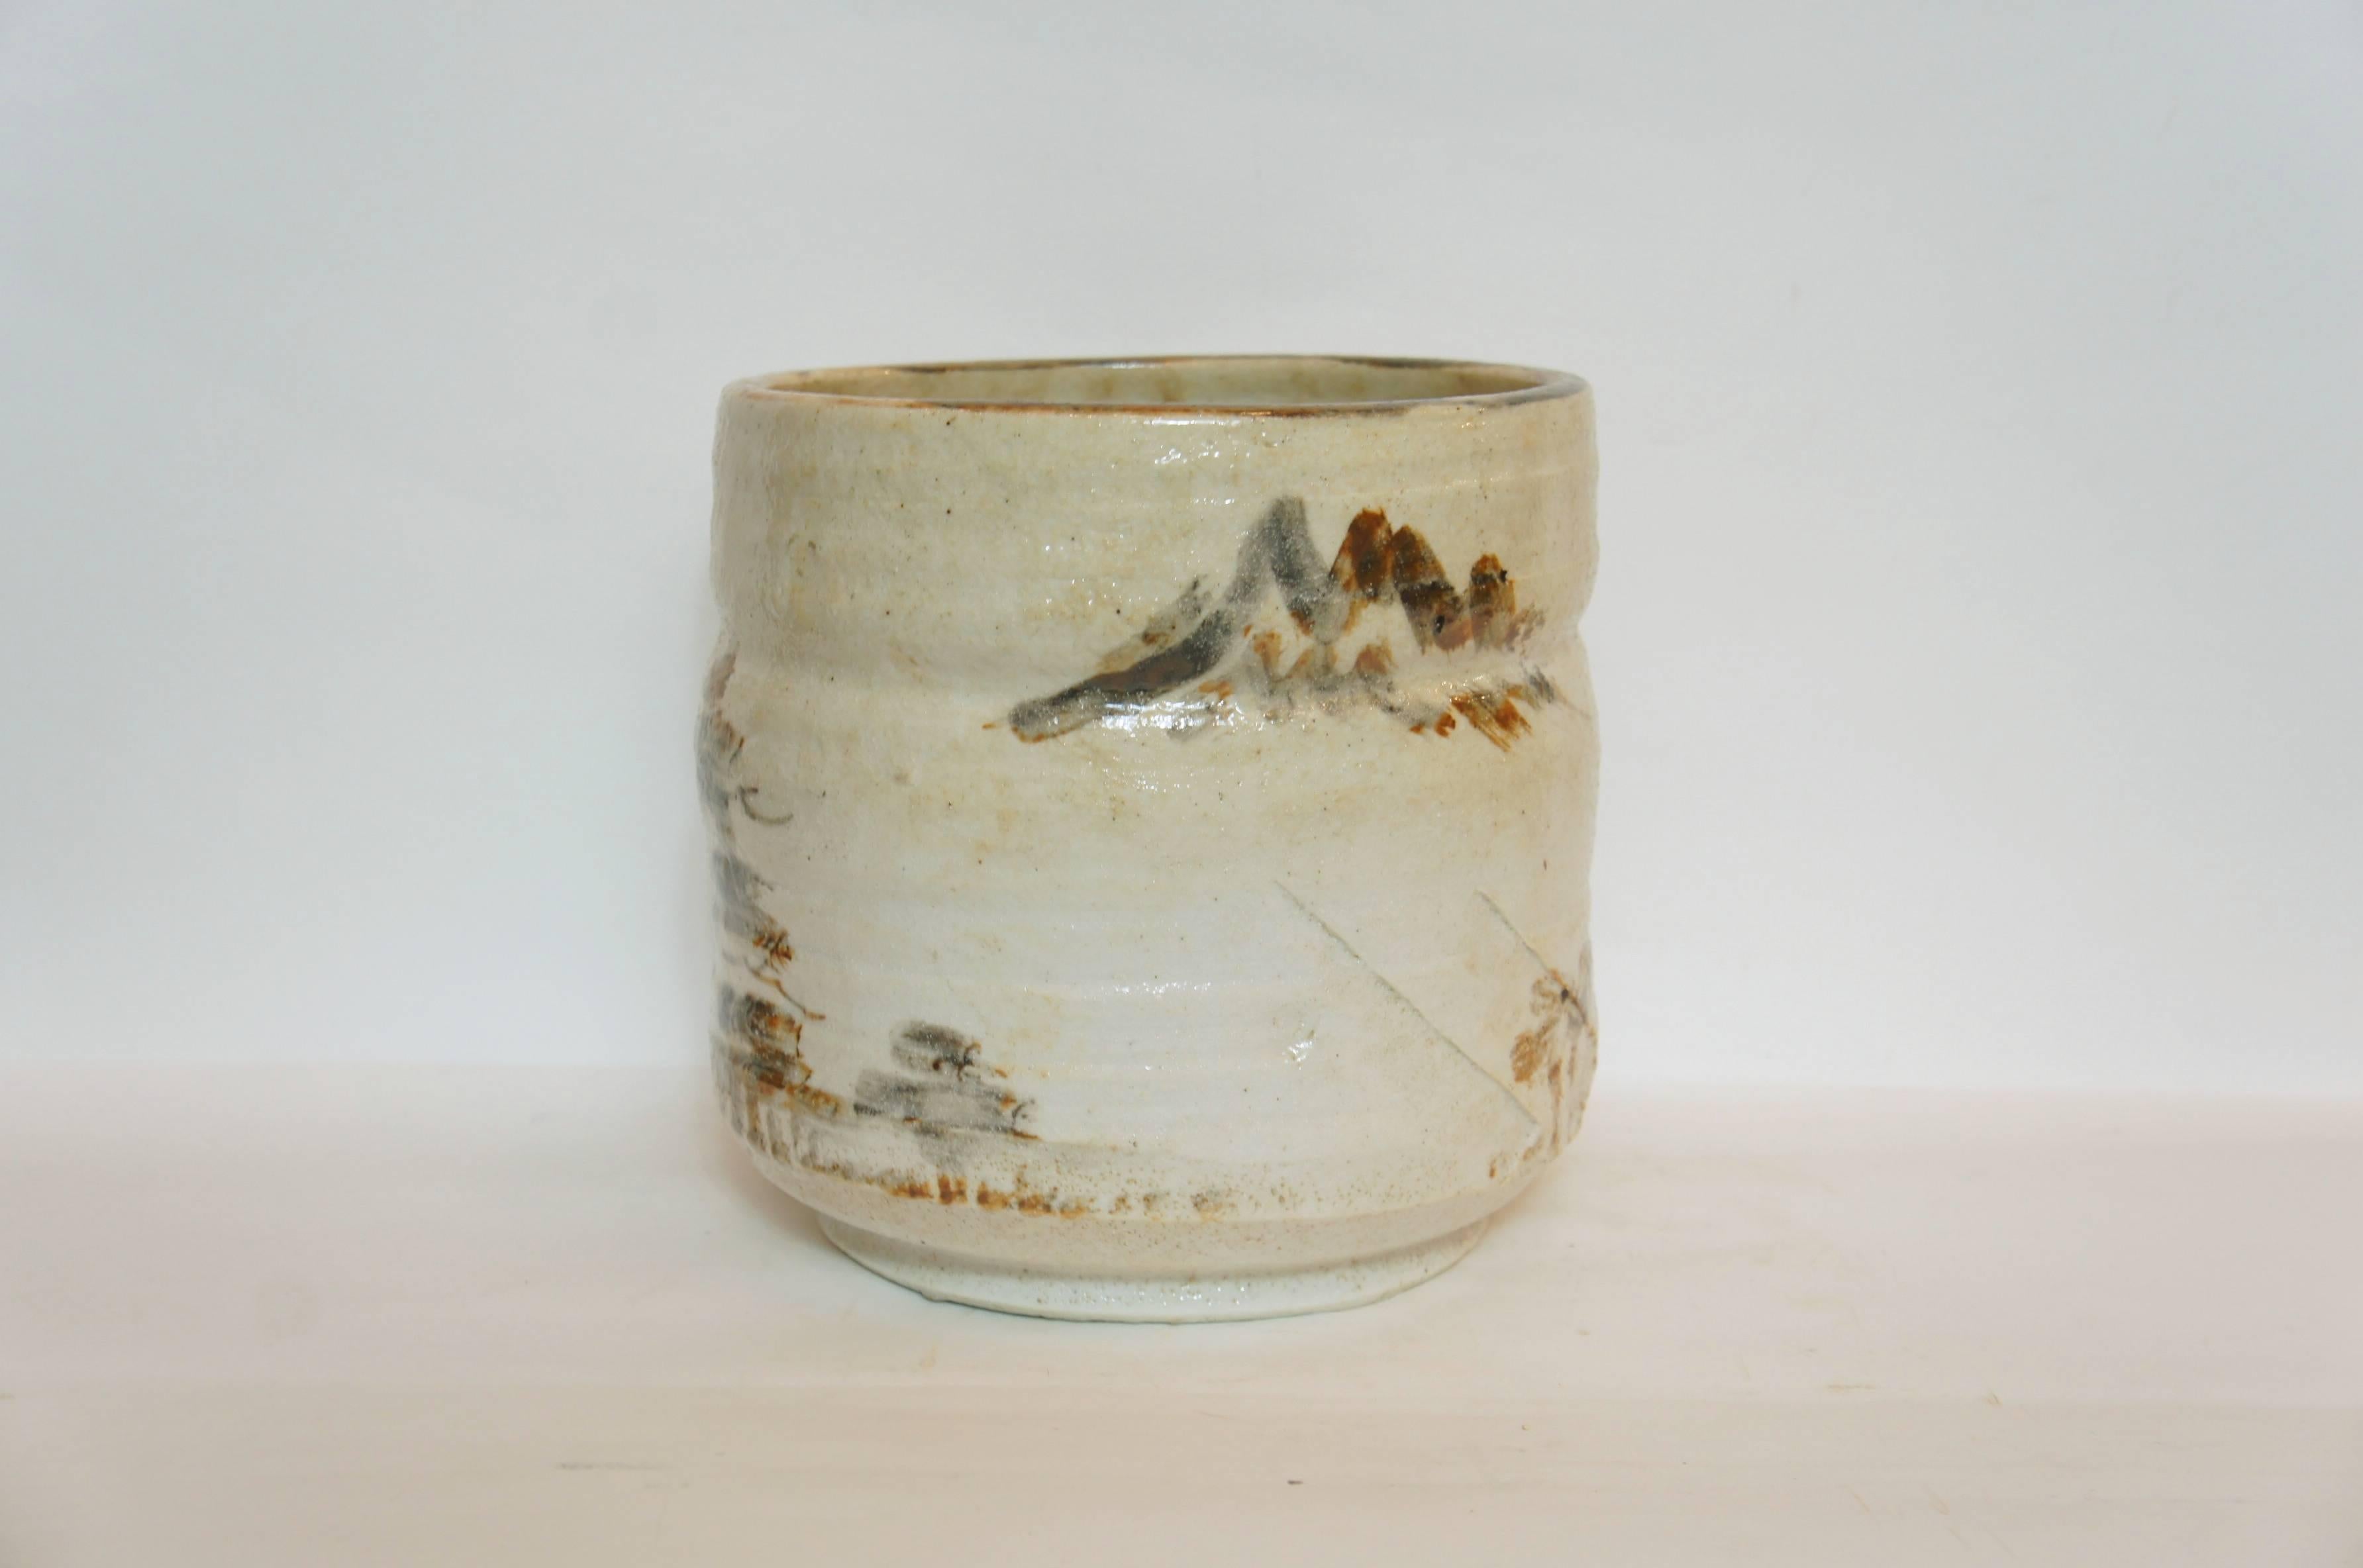 Shino ware is Japanese pottery, usually stoneware, originally from Mino Province, in present-day Gifu Prefecture, Japan. It emerged in the 16th century, but is now widespread, including use abroad. It is identified by thick white glazes, red scorch